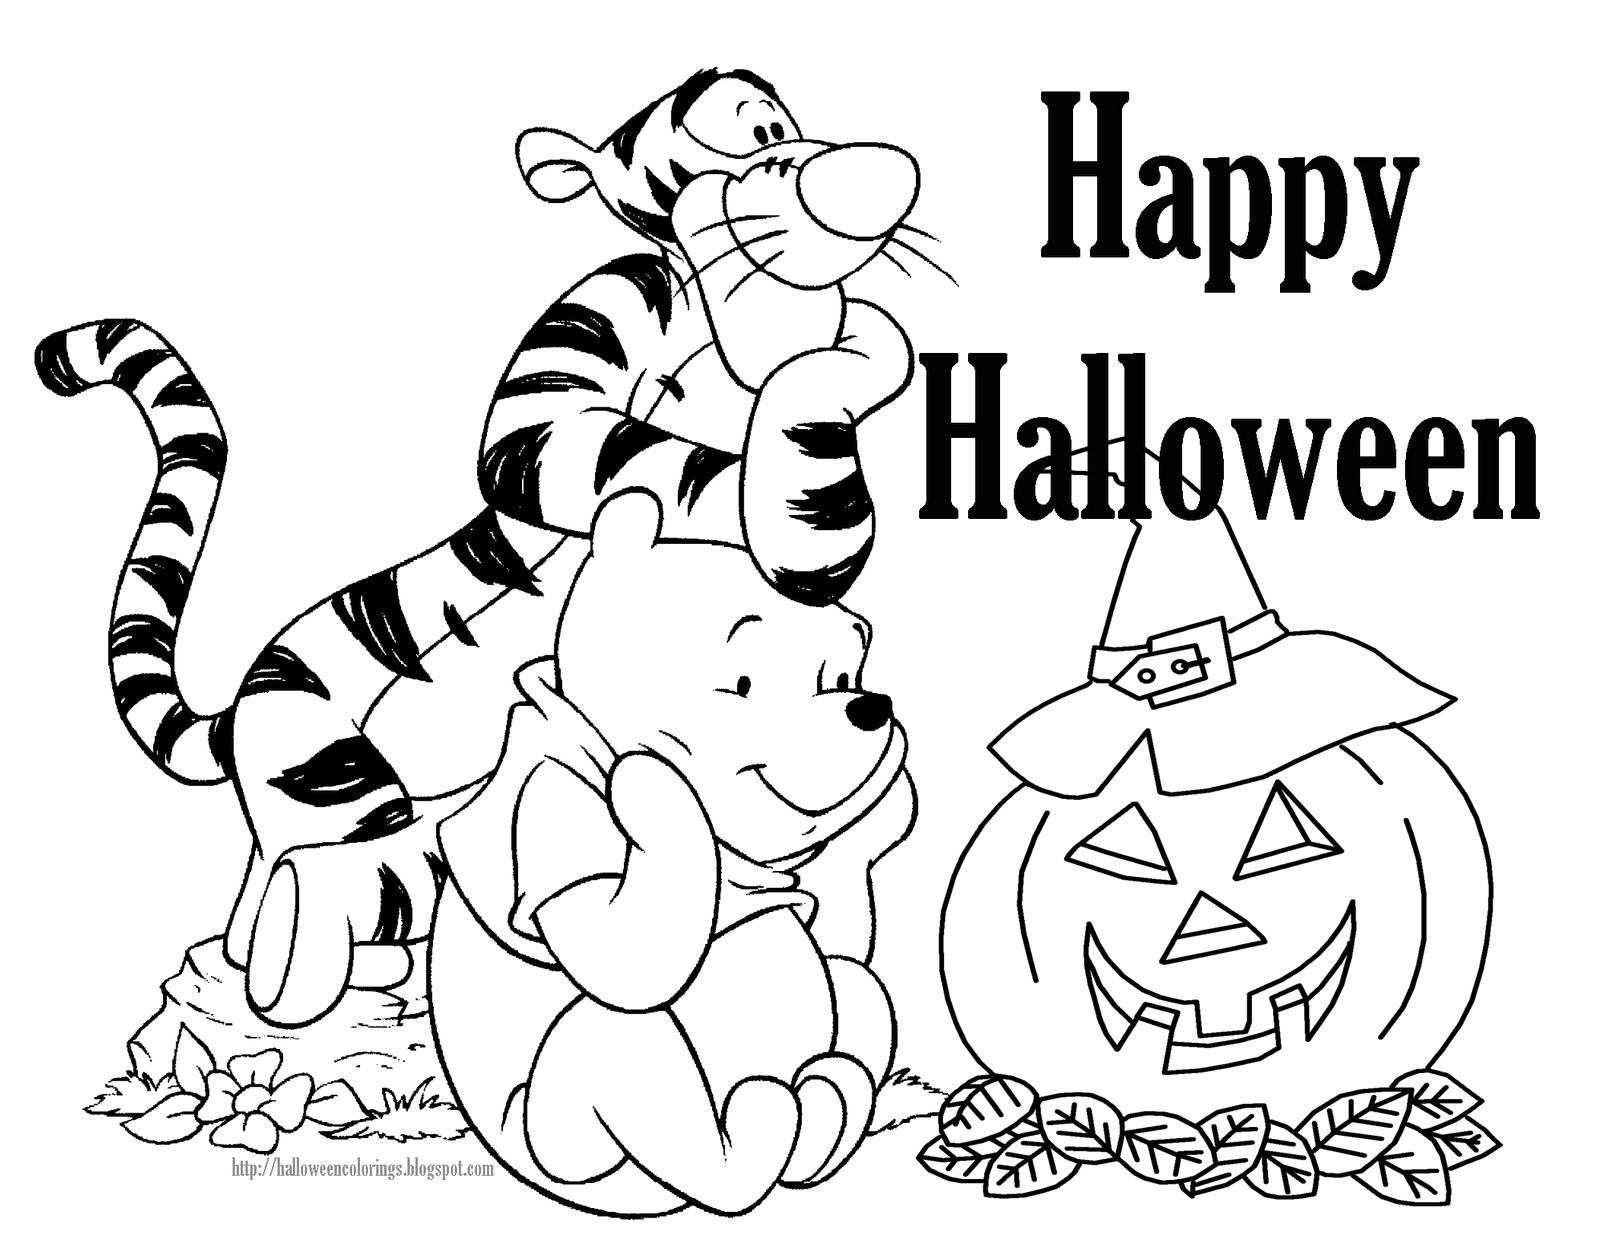 Coloring Ideas : Fun Free Halloween Printables For Kids Printable - Free Printable Halloween Coloring Pages